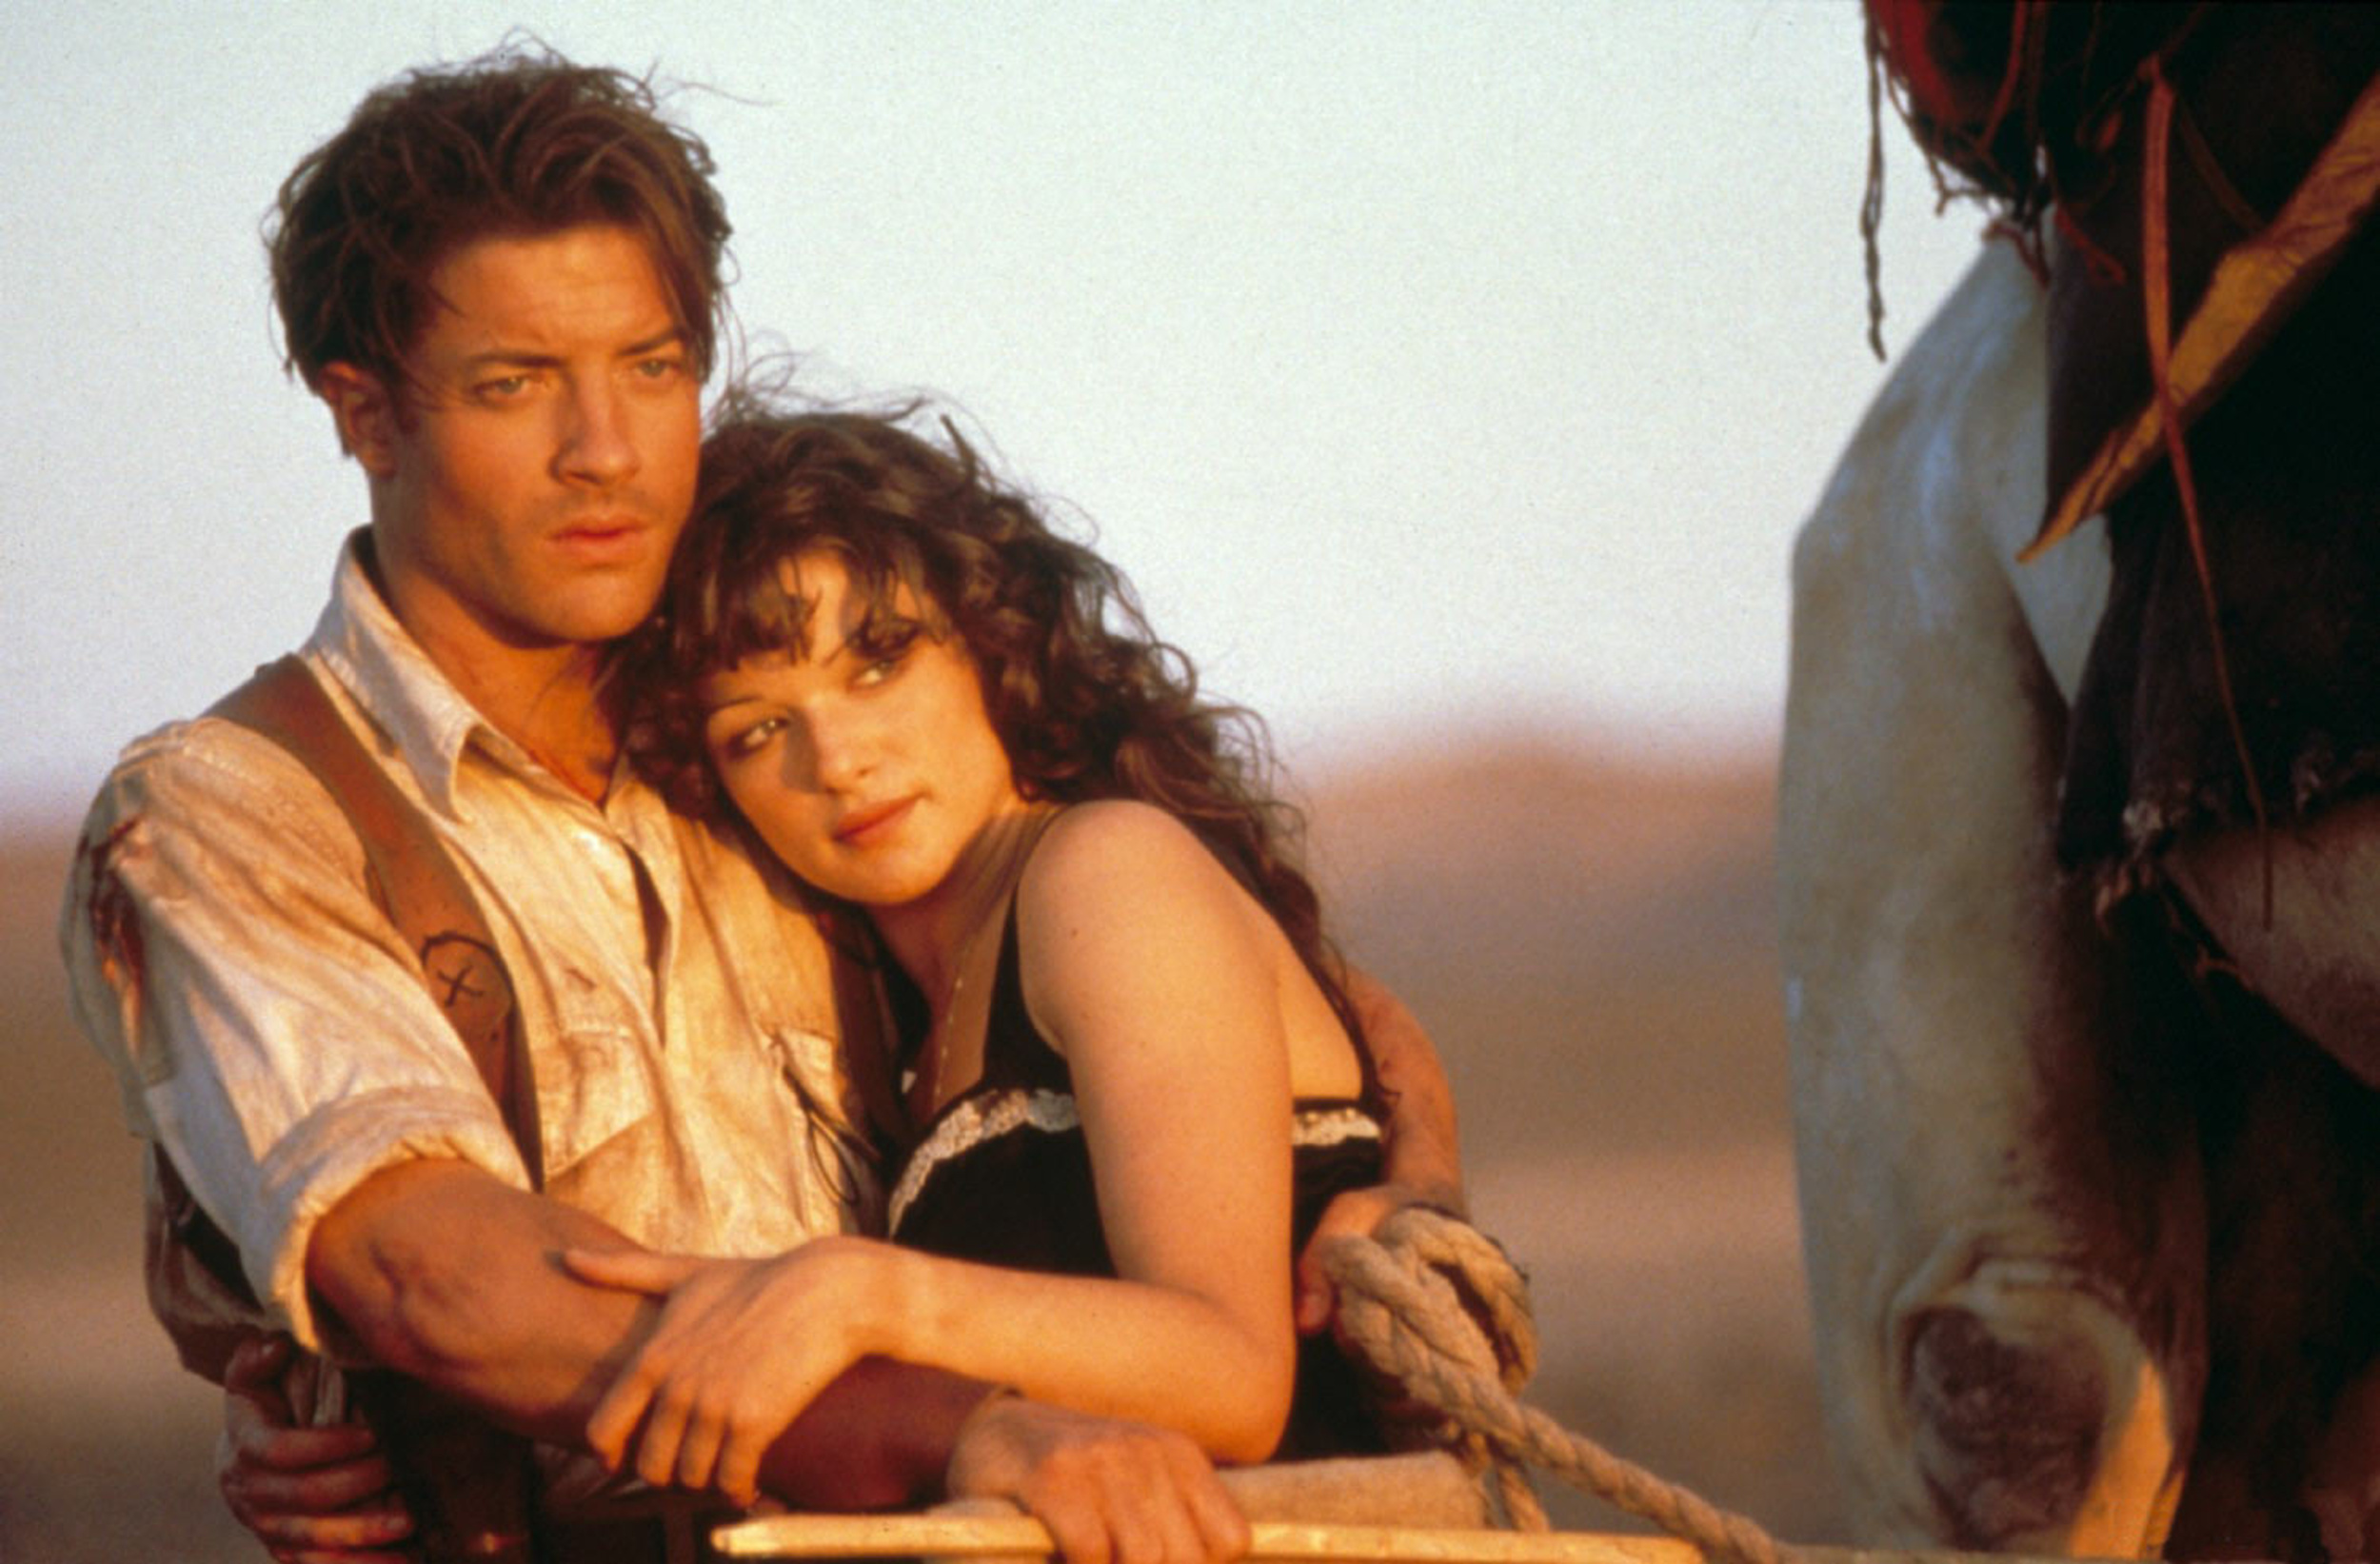 <p><span><em>The Mummy </em>was and will forever be iconic.</span></p><p><a href='https://www.msn.com/en-us/community/channel/vid-cj9pqbr0vn9in2b6ddcd8sfgpfq6x6utp44fssrv6mc2gtybw0us'>Follow us on MSN to see more of our exclusive entertainment content.</a></p>